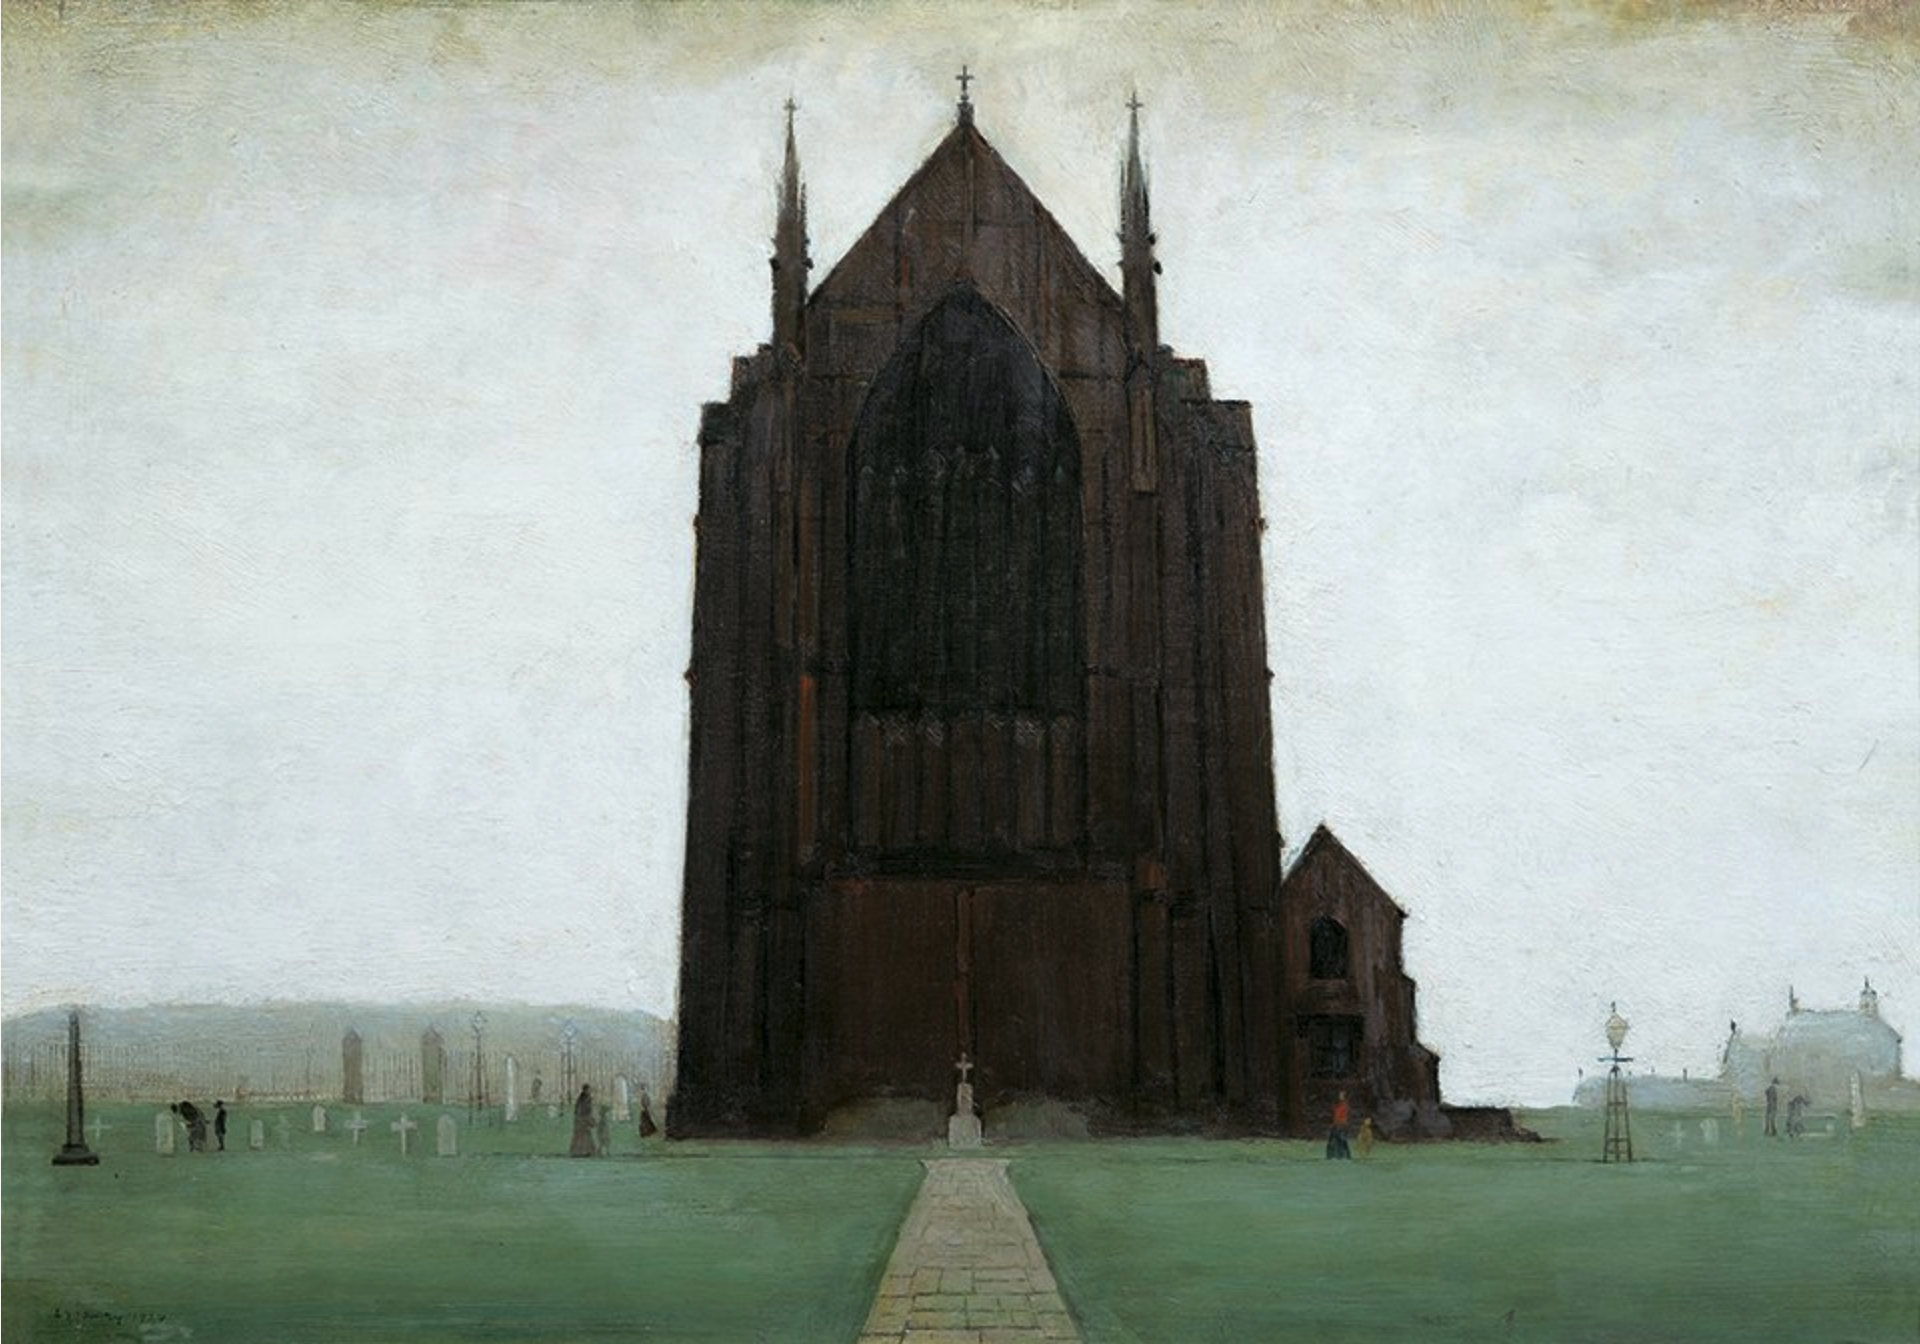 St Augustine's Church, Pendlebury (1924) by Laurence Stephen Lowry (1887 - 1976), English artist.